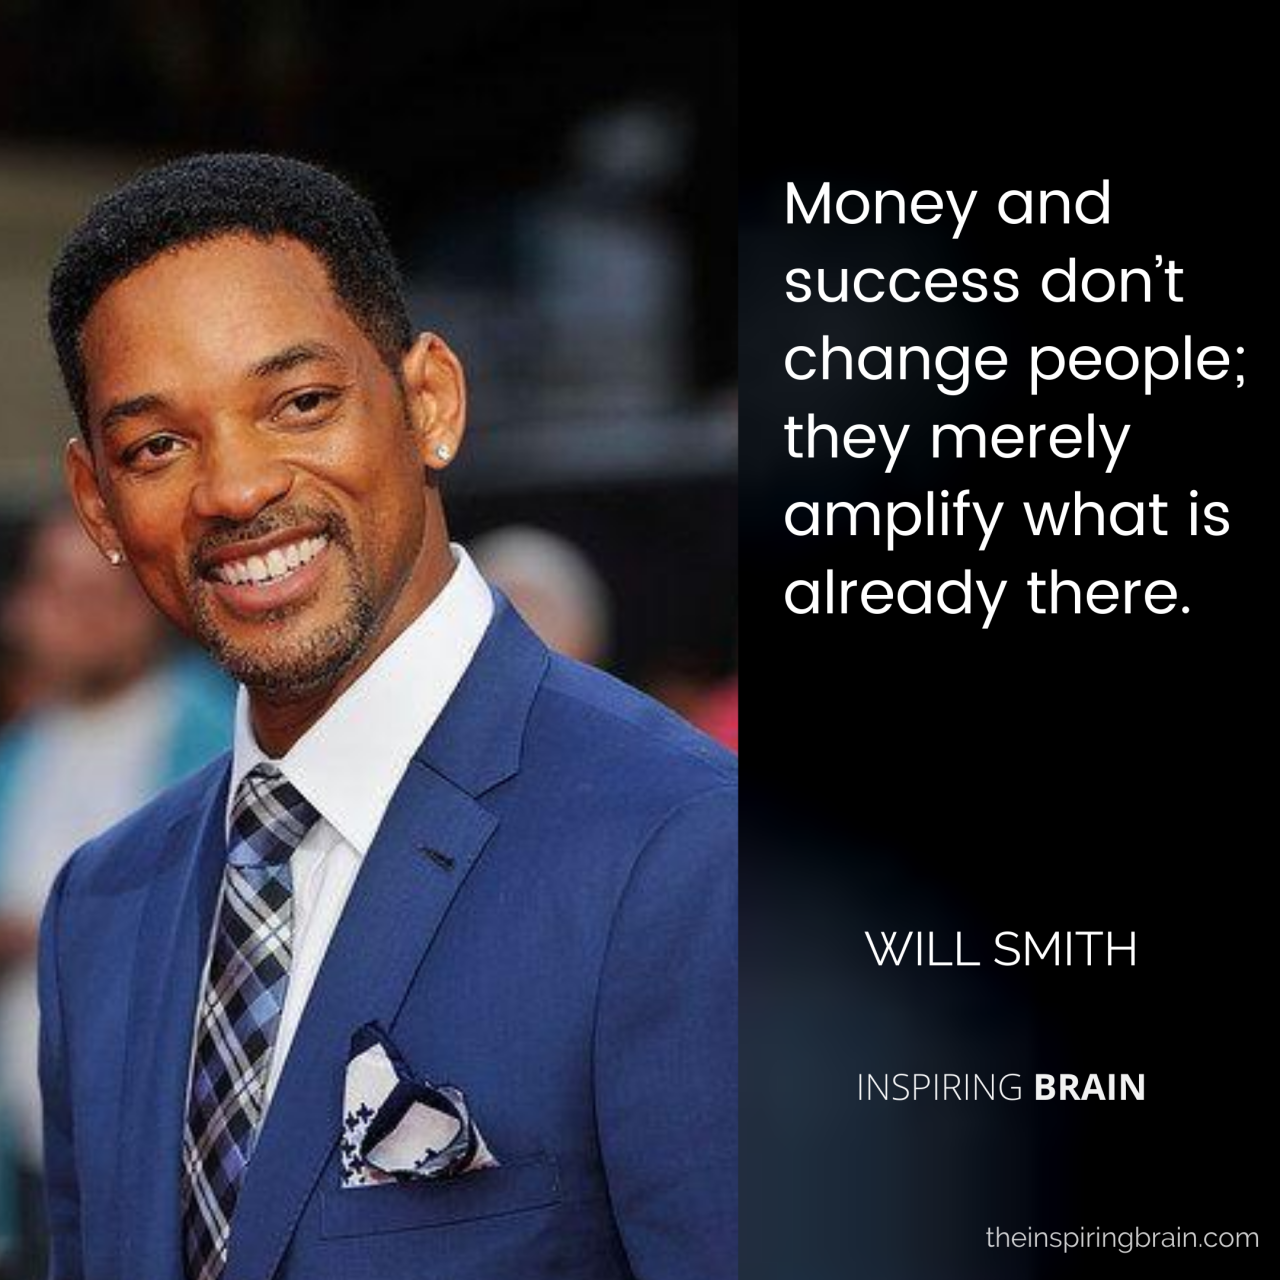 14 Most Inspiring Will Smith Quotes in 2020 Will smith quotes, Quotes by famous people